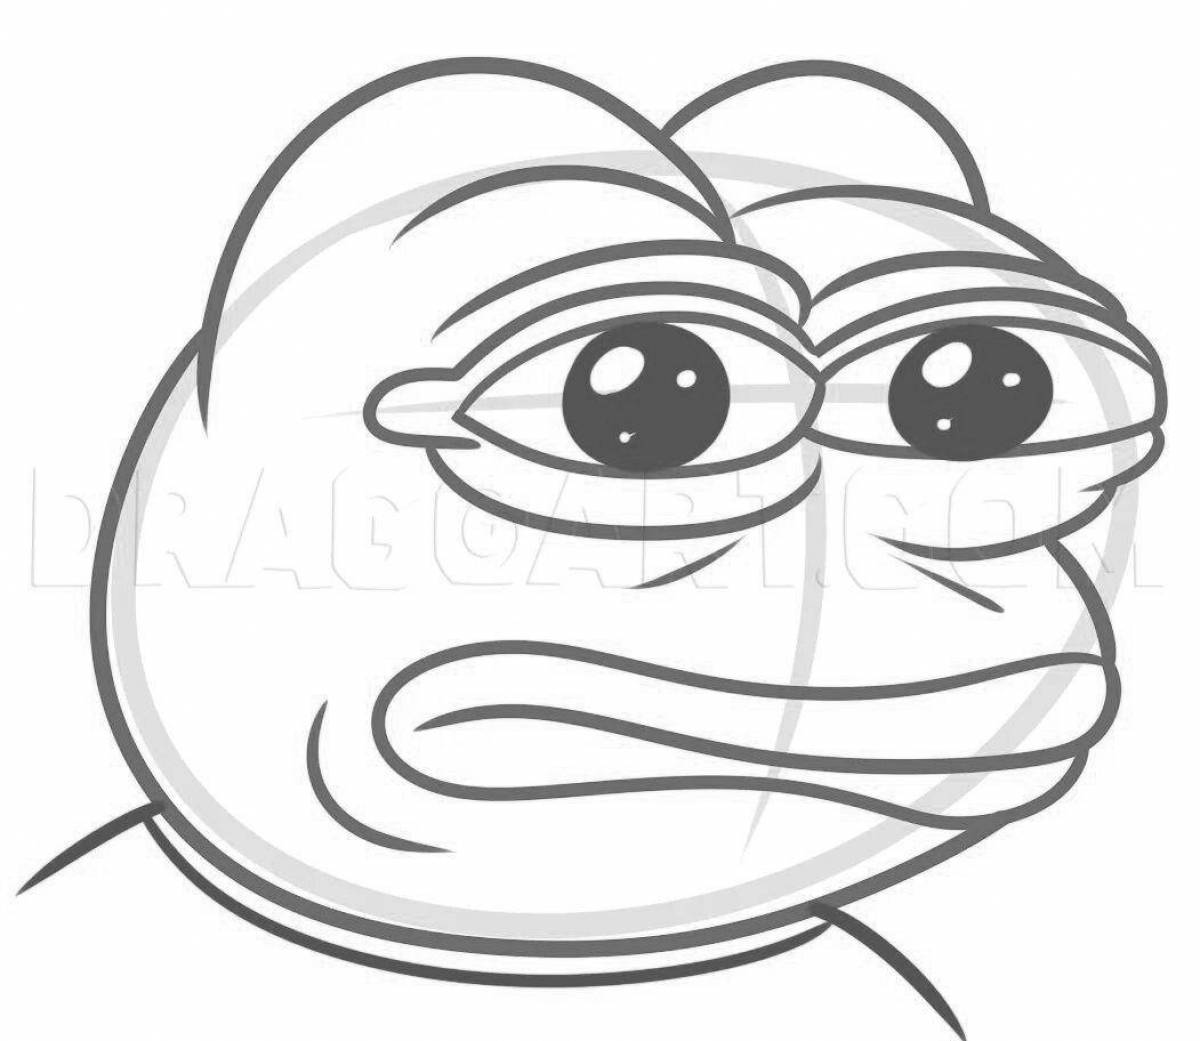 Pepe the frog coloring page with splashes of color